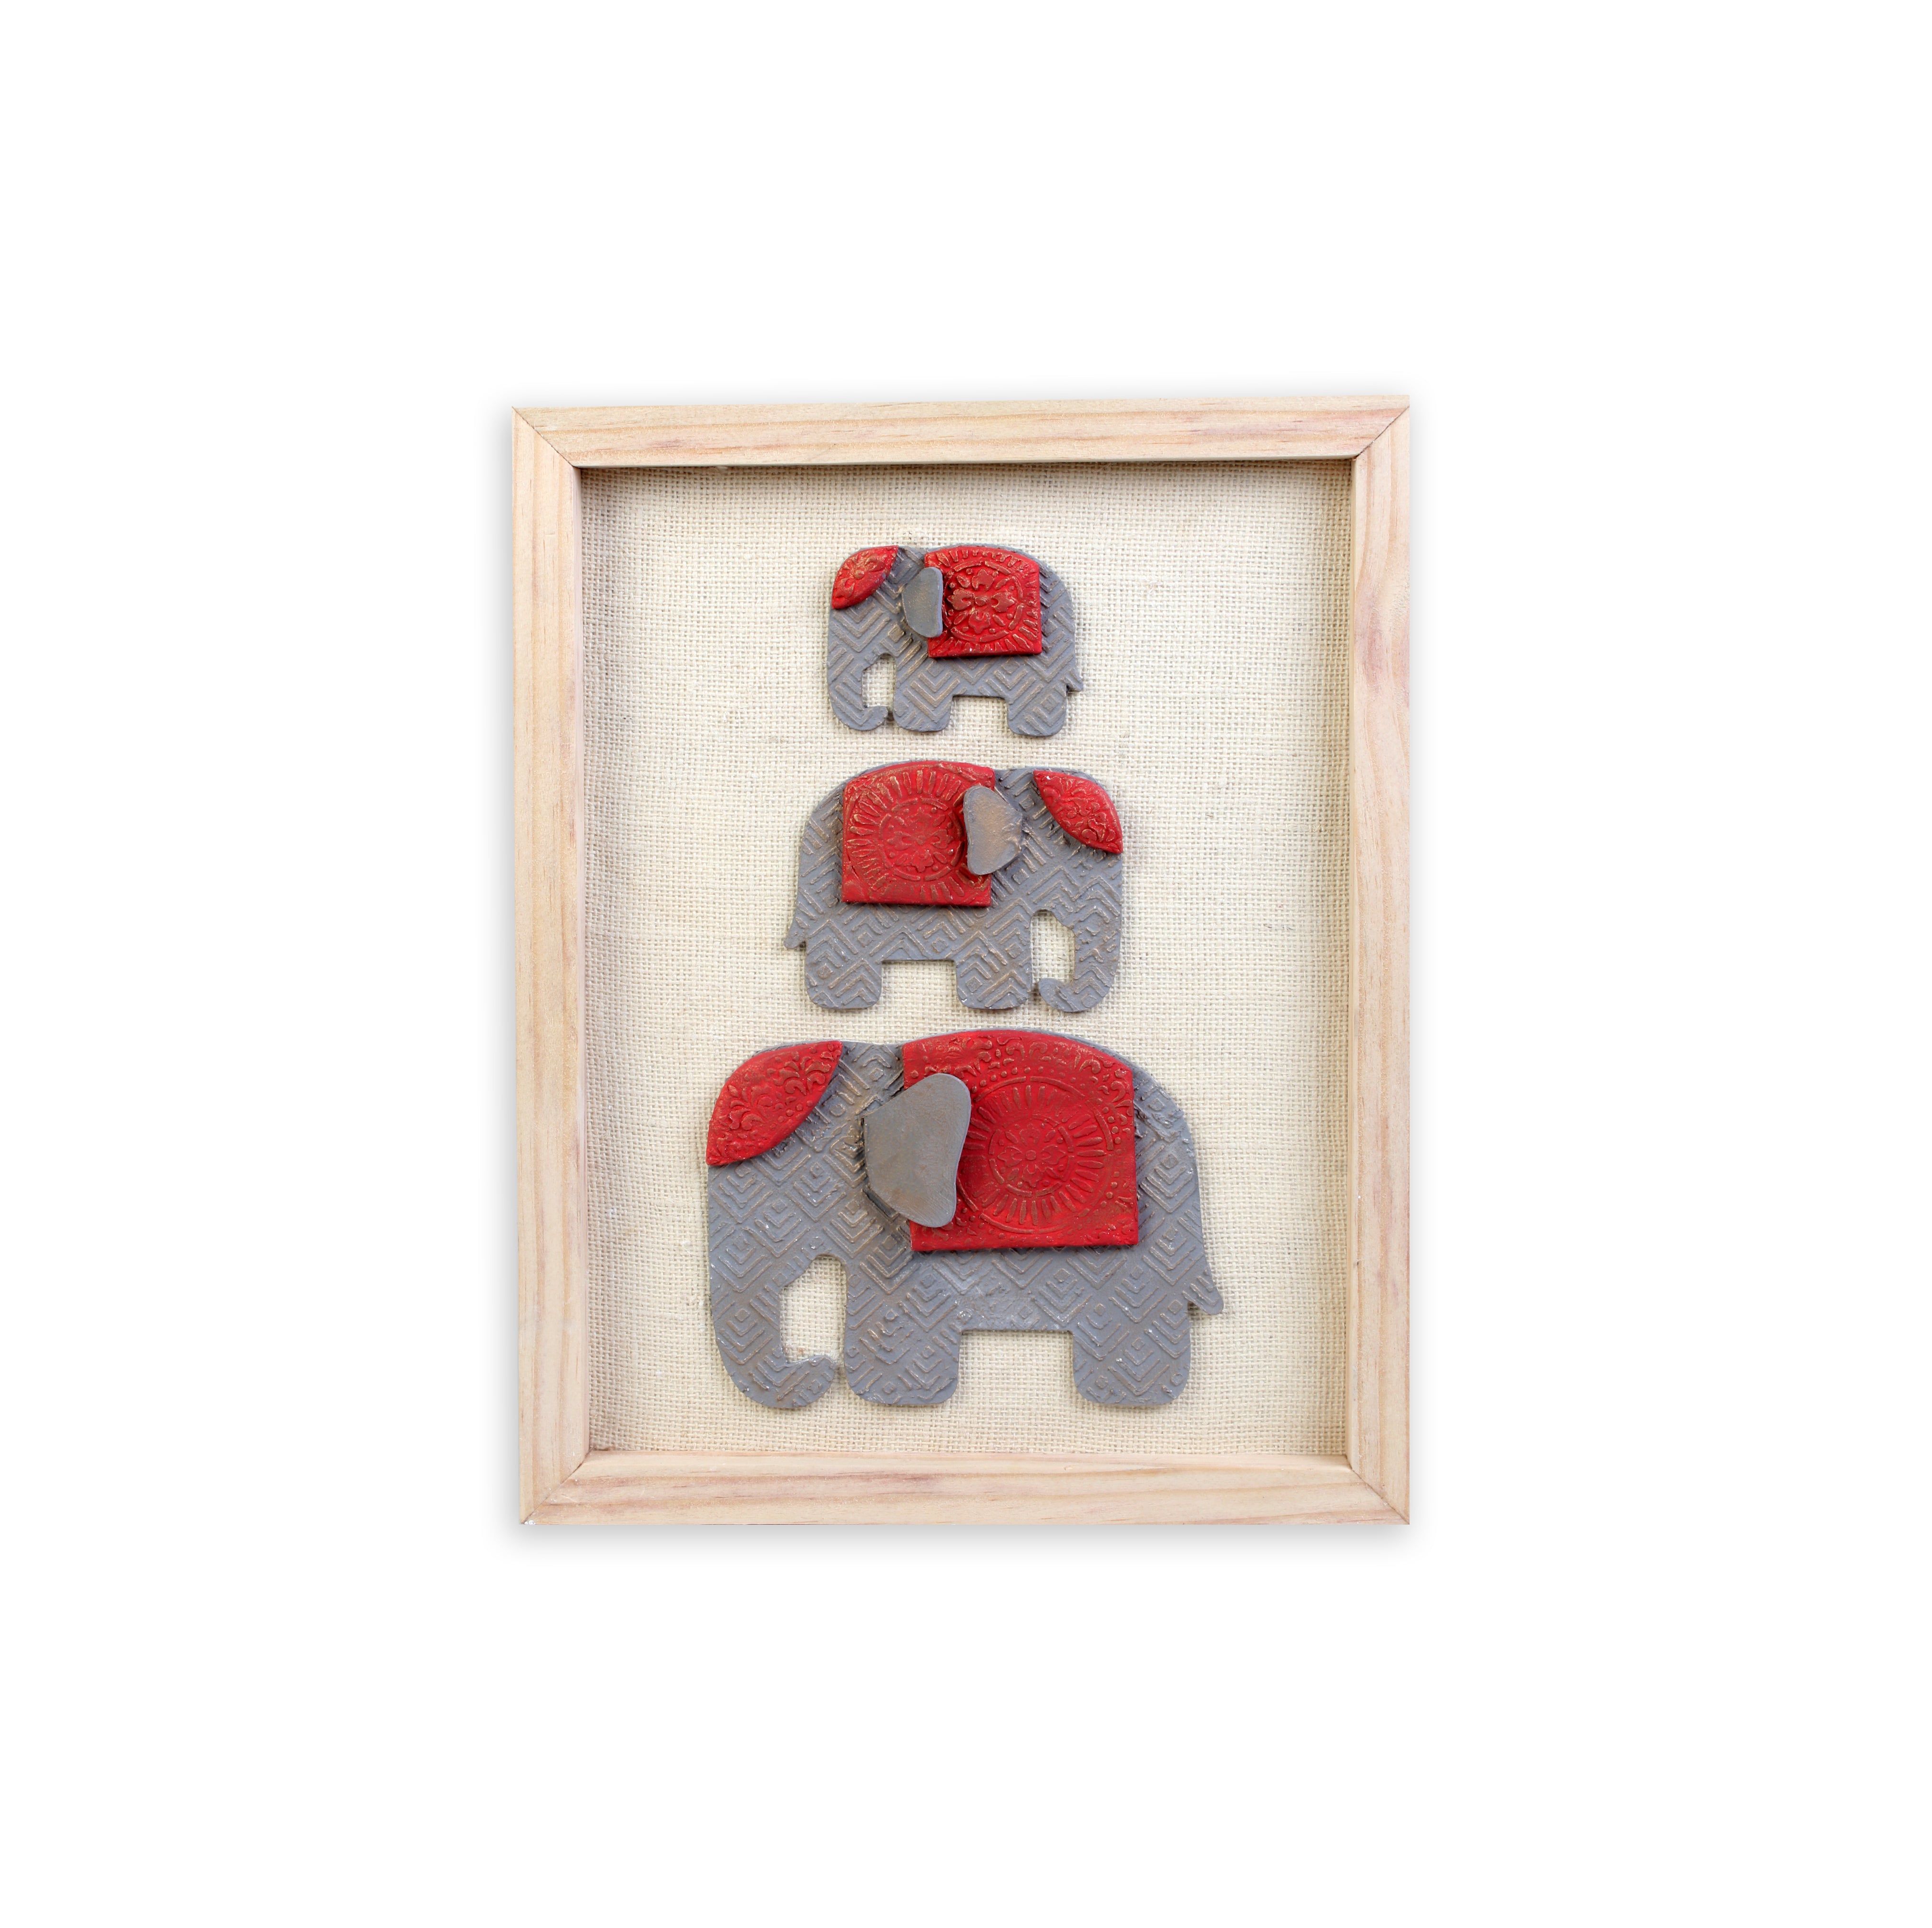 Wall Decor Hmade Majestic Elephant Grey and Red with Wooden Frame Approx H14 X L11 X D0.66inch 1pc